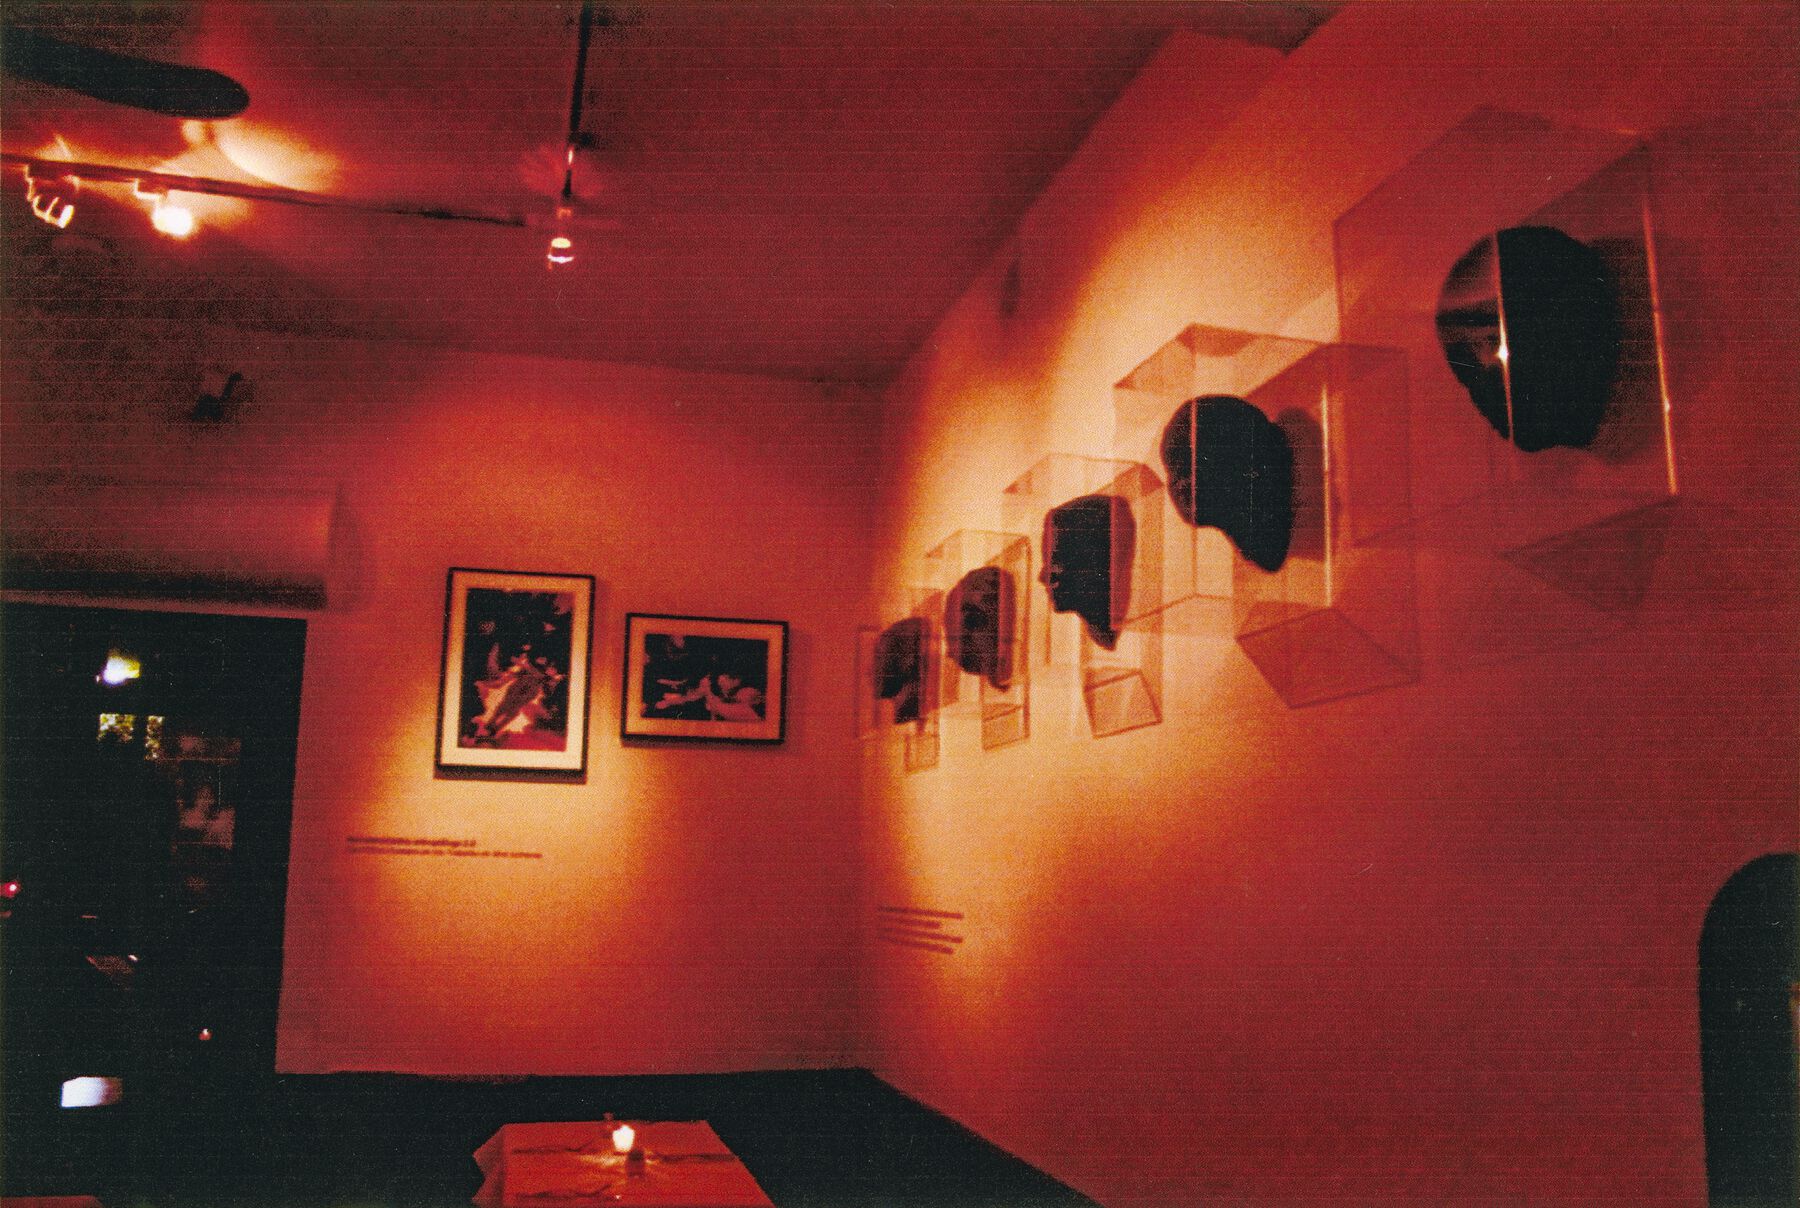 A dimly lighted gallery displaying 5 chocolate head sculptures with 2 art pieces in the distance